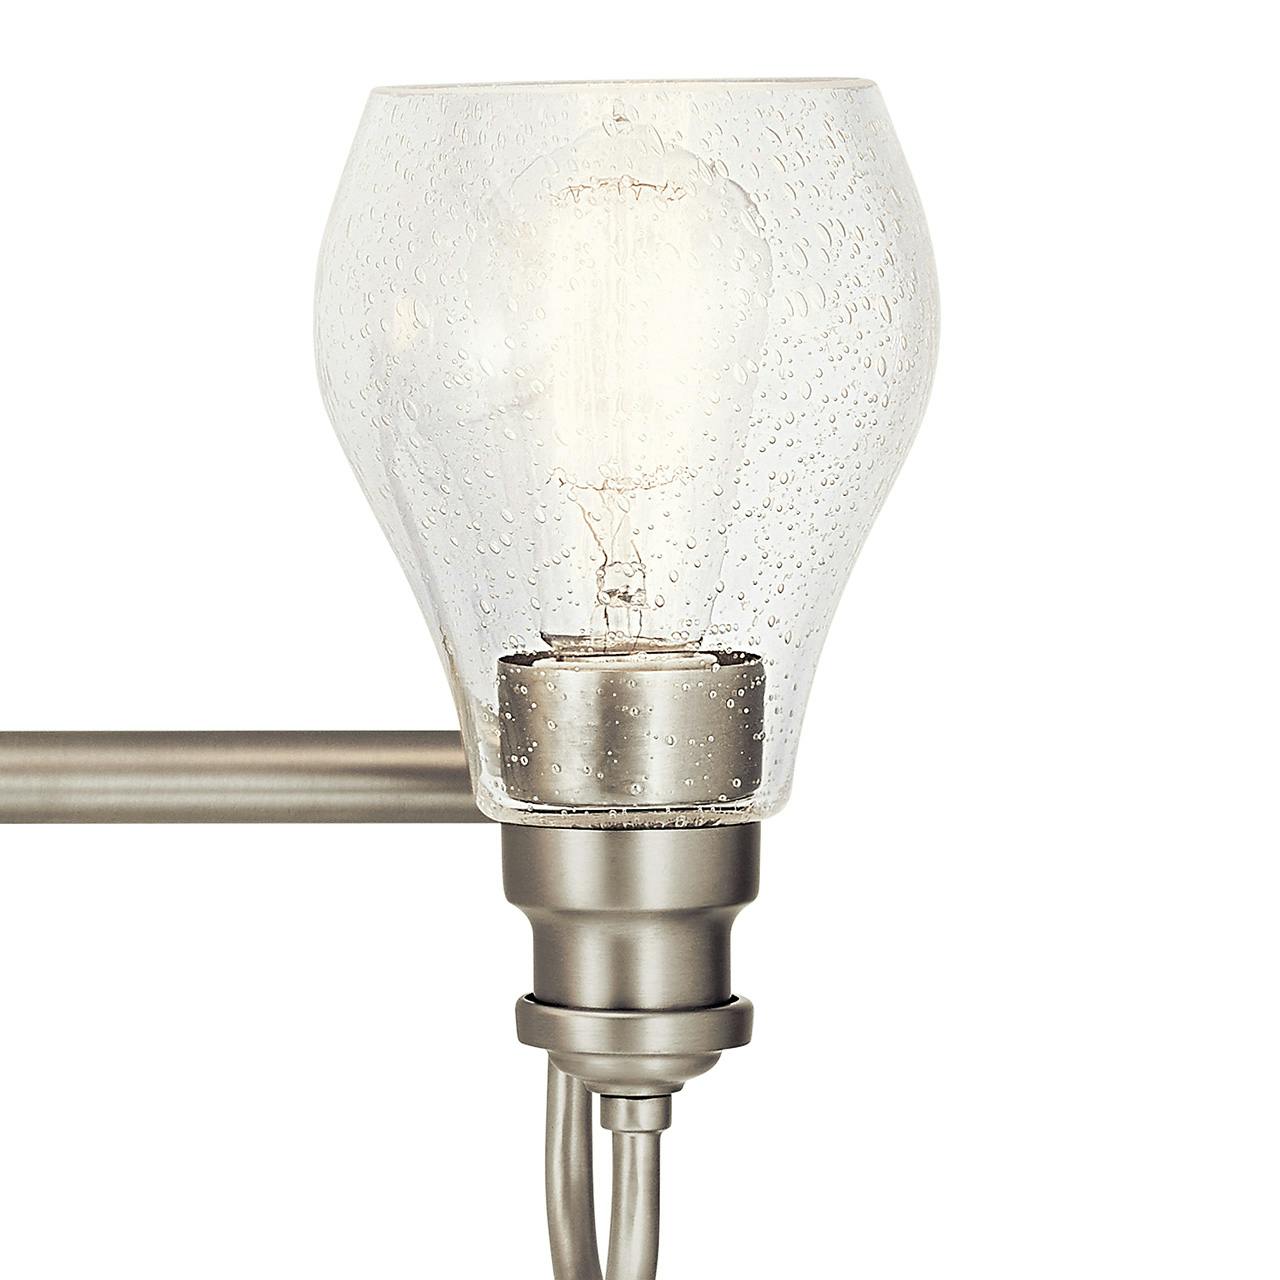 Close up view of the Greenbrier™ 4 Light Vanity Light Nickel on a white background